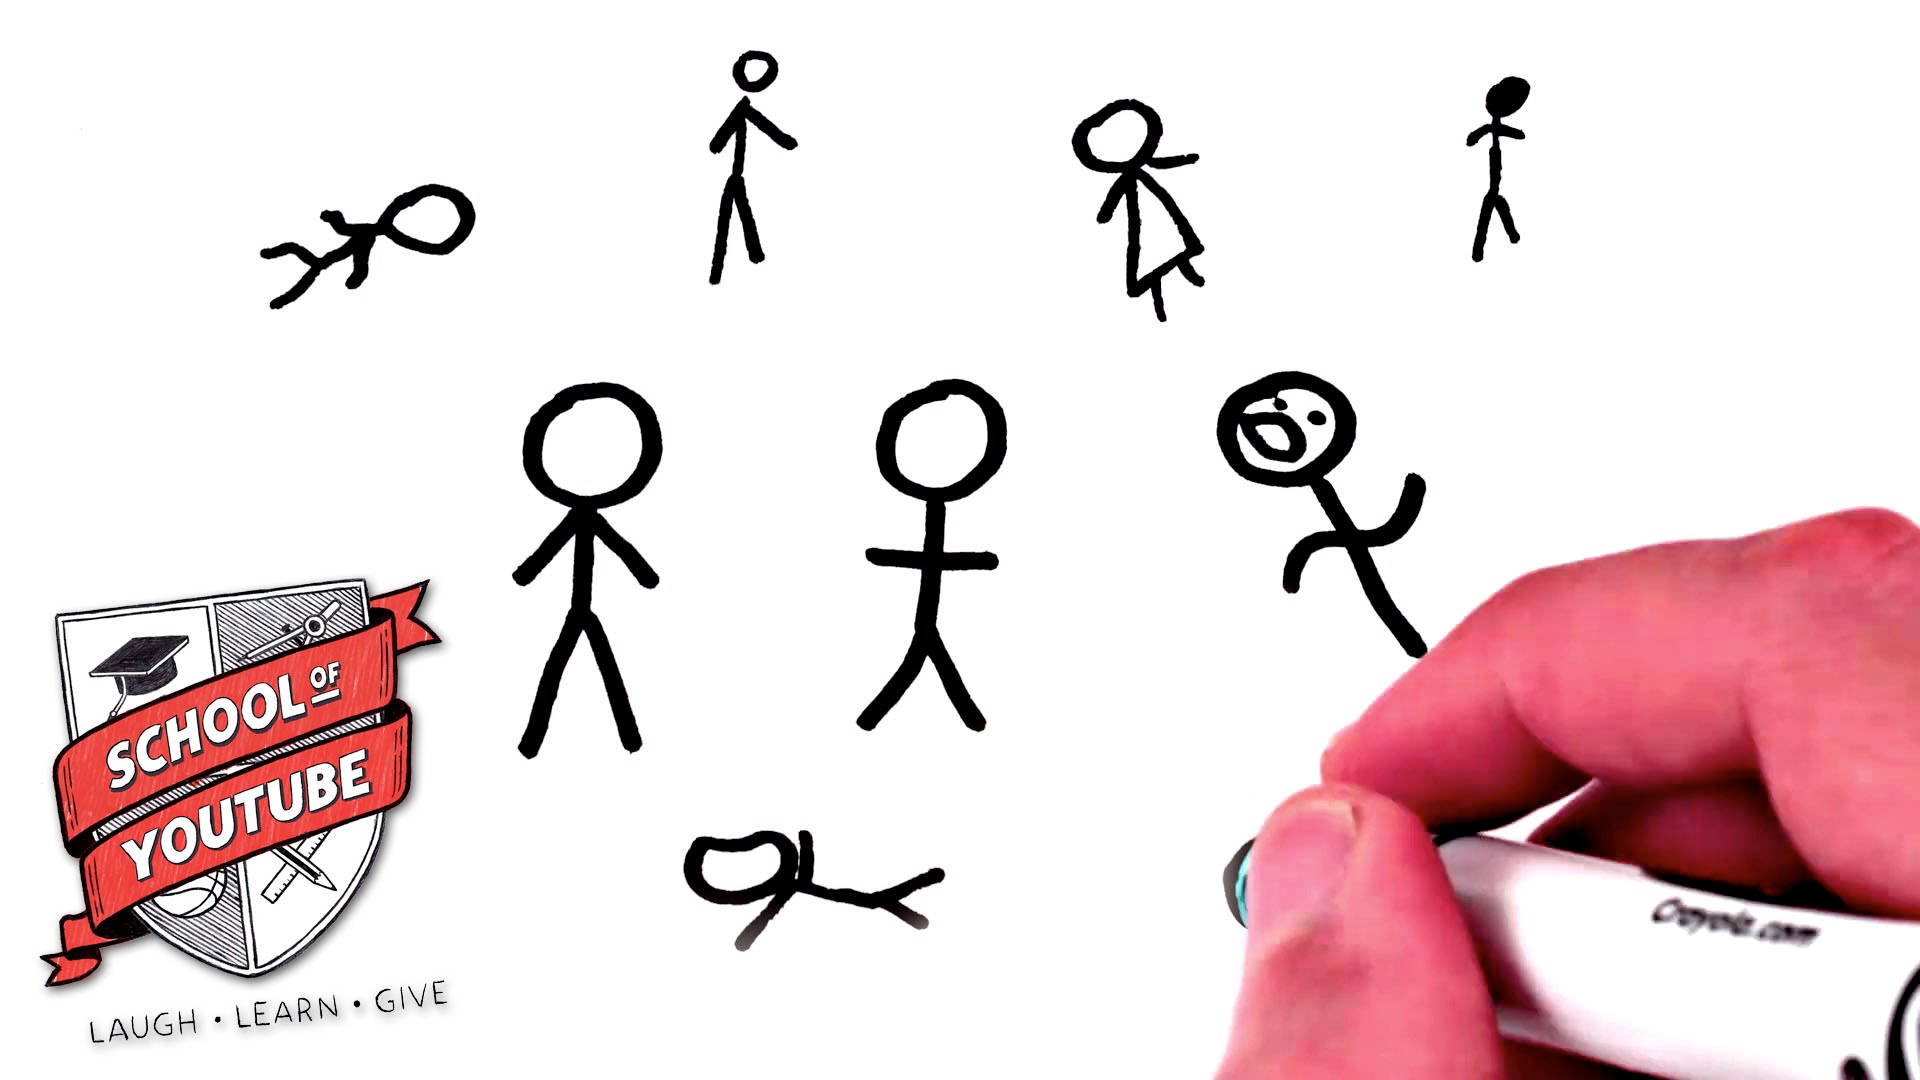 How to Draw a Stick Figure (School of Youtube) - YouTube